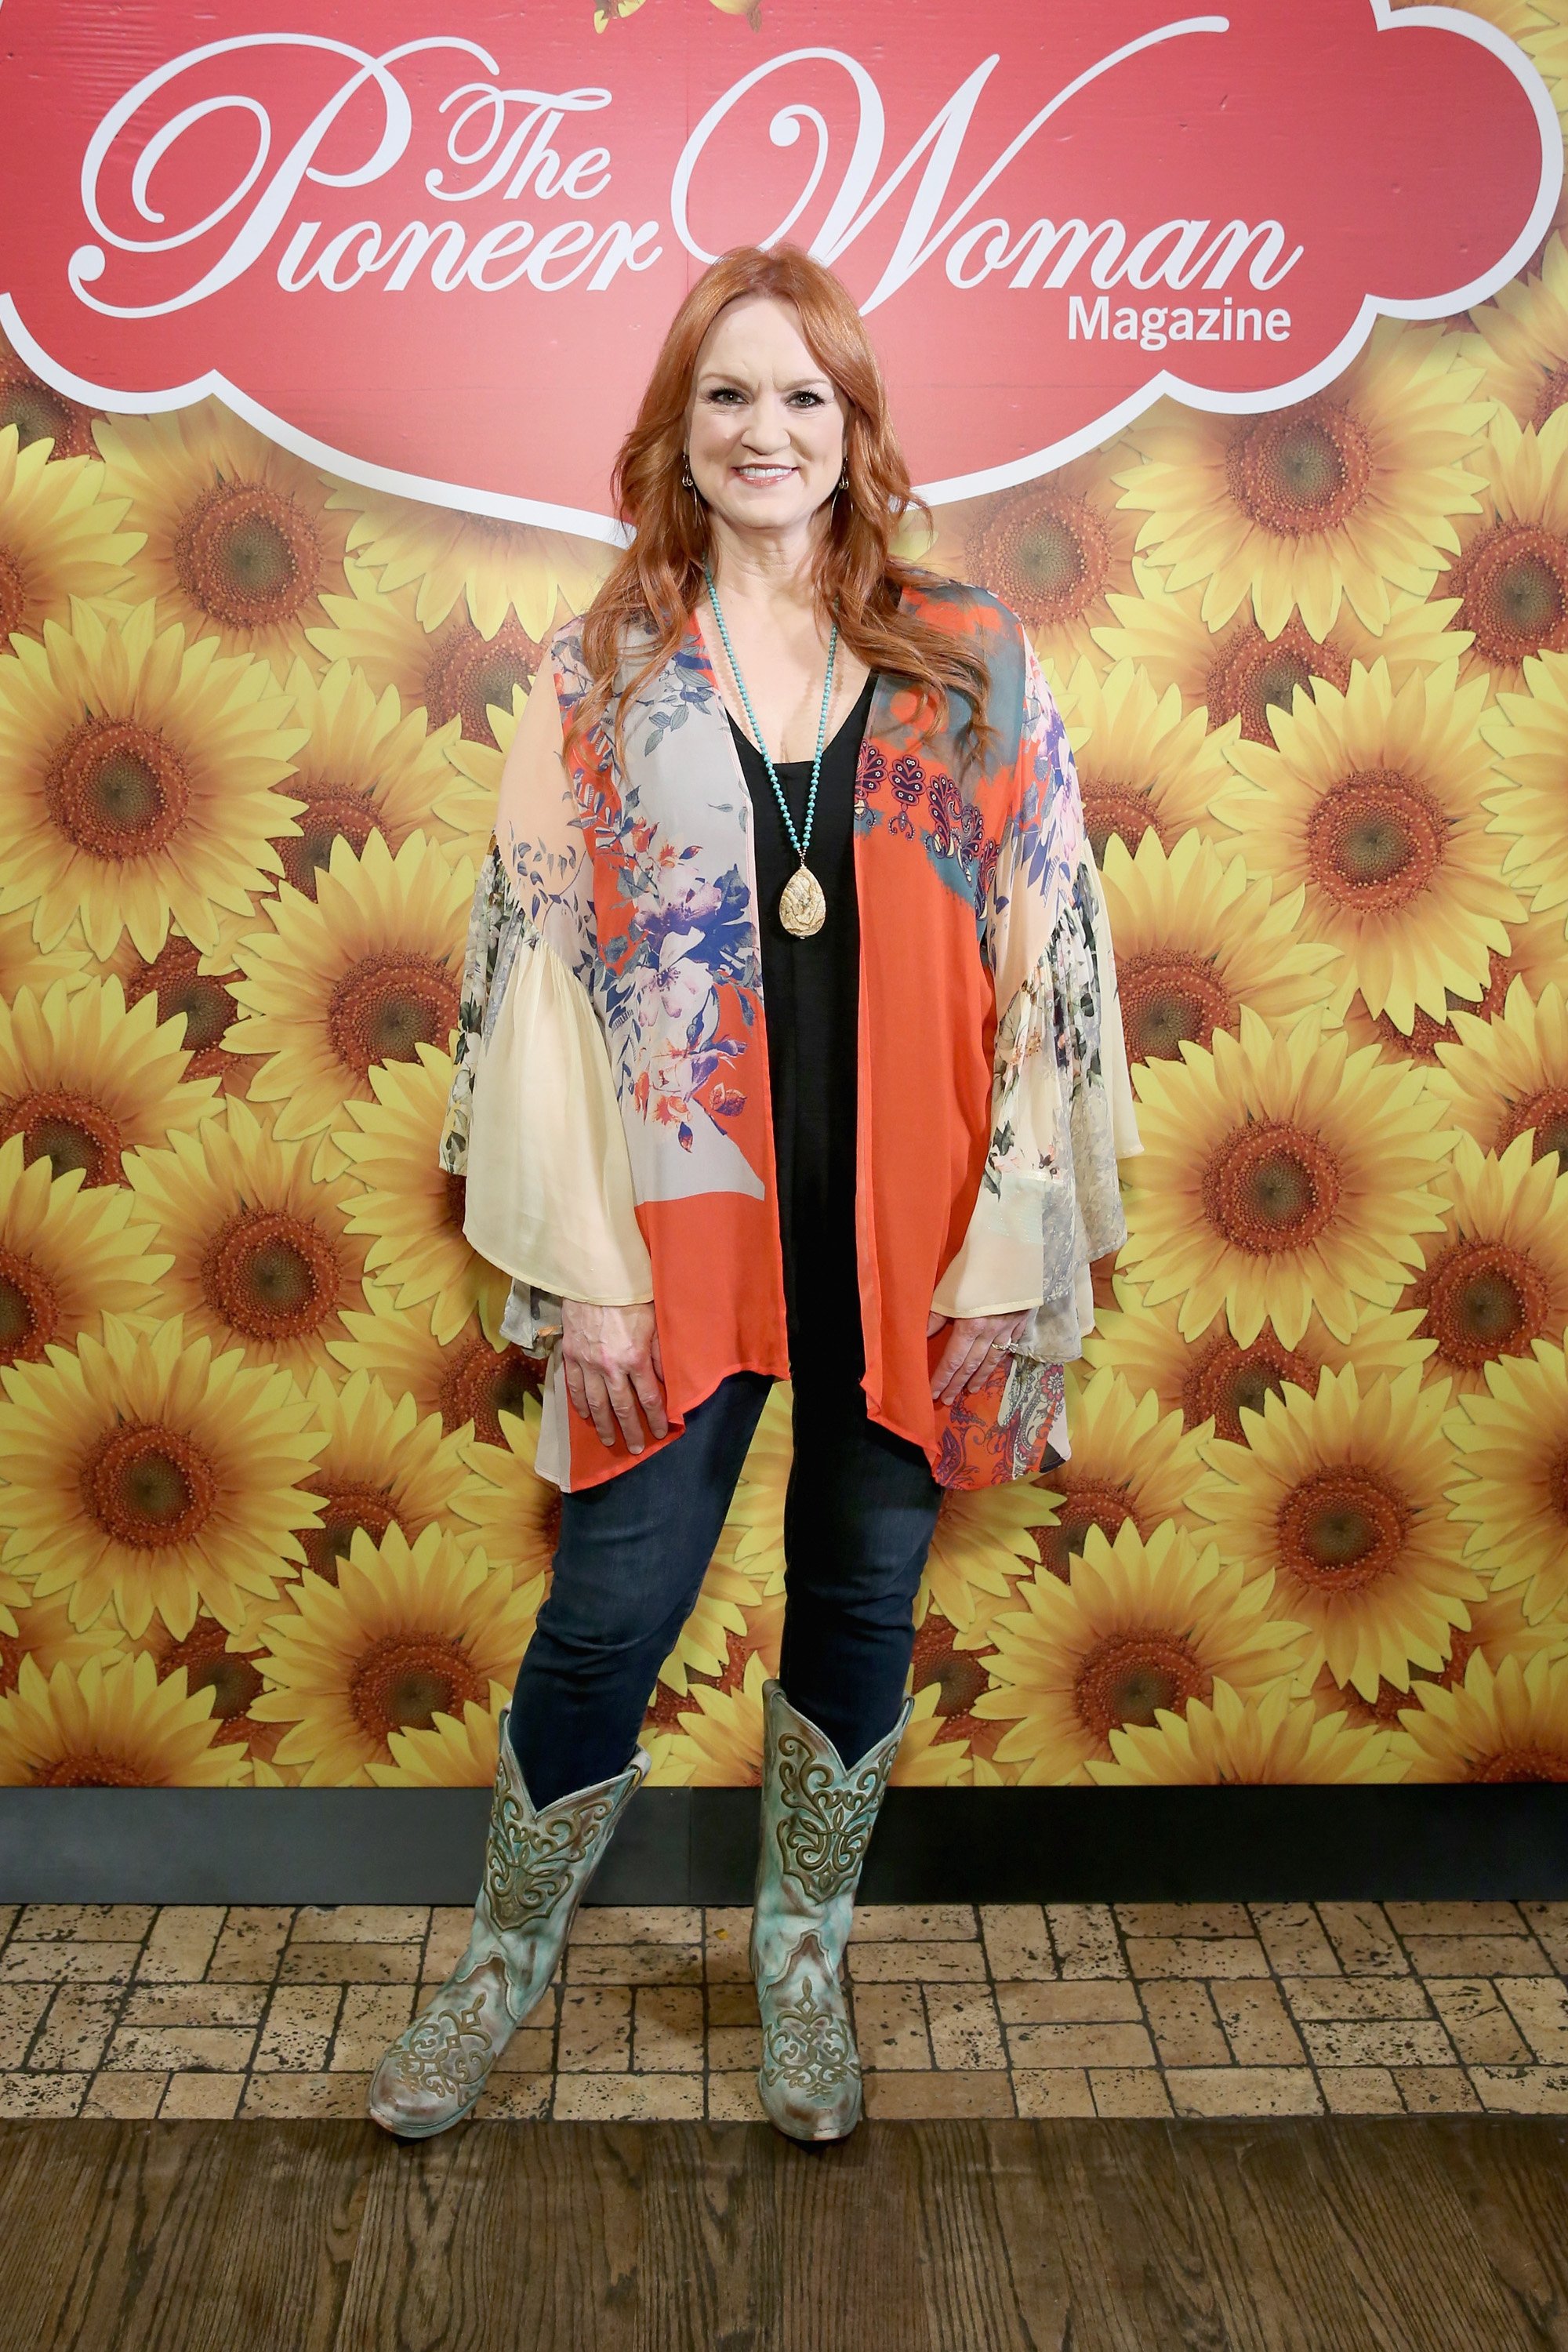 Ree Drummond attends the "Pioneer Woman" magazine celebration at the Mason Jar in New York City on June 6, 2017 | Photo: Getty Images